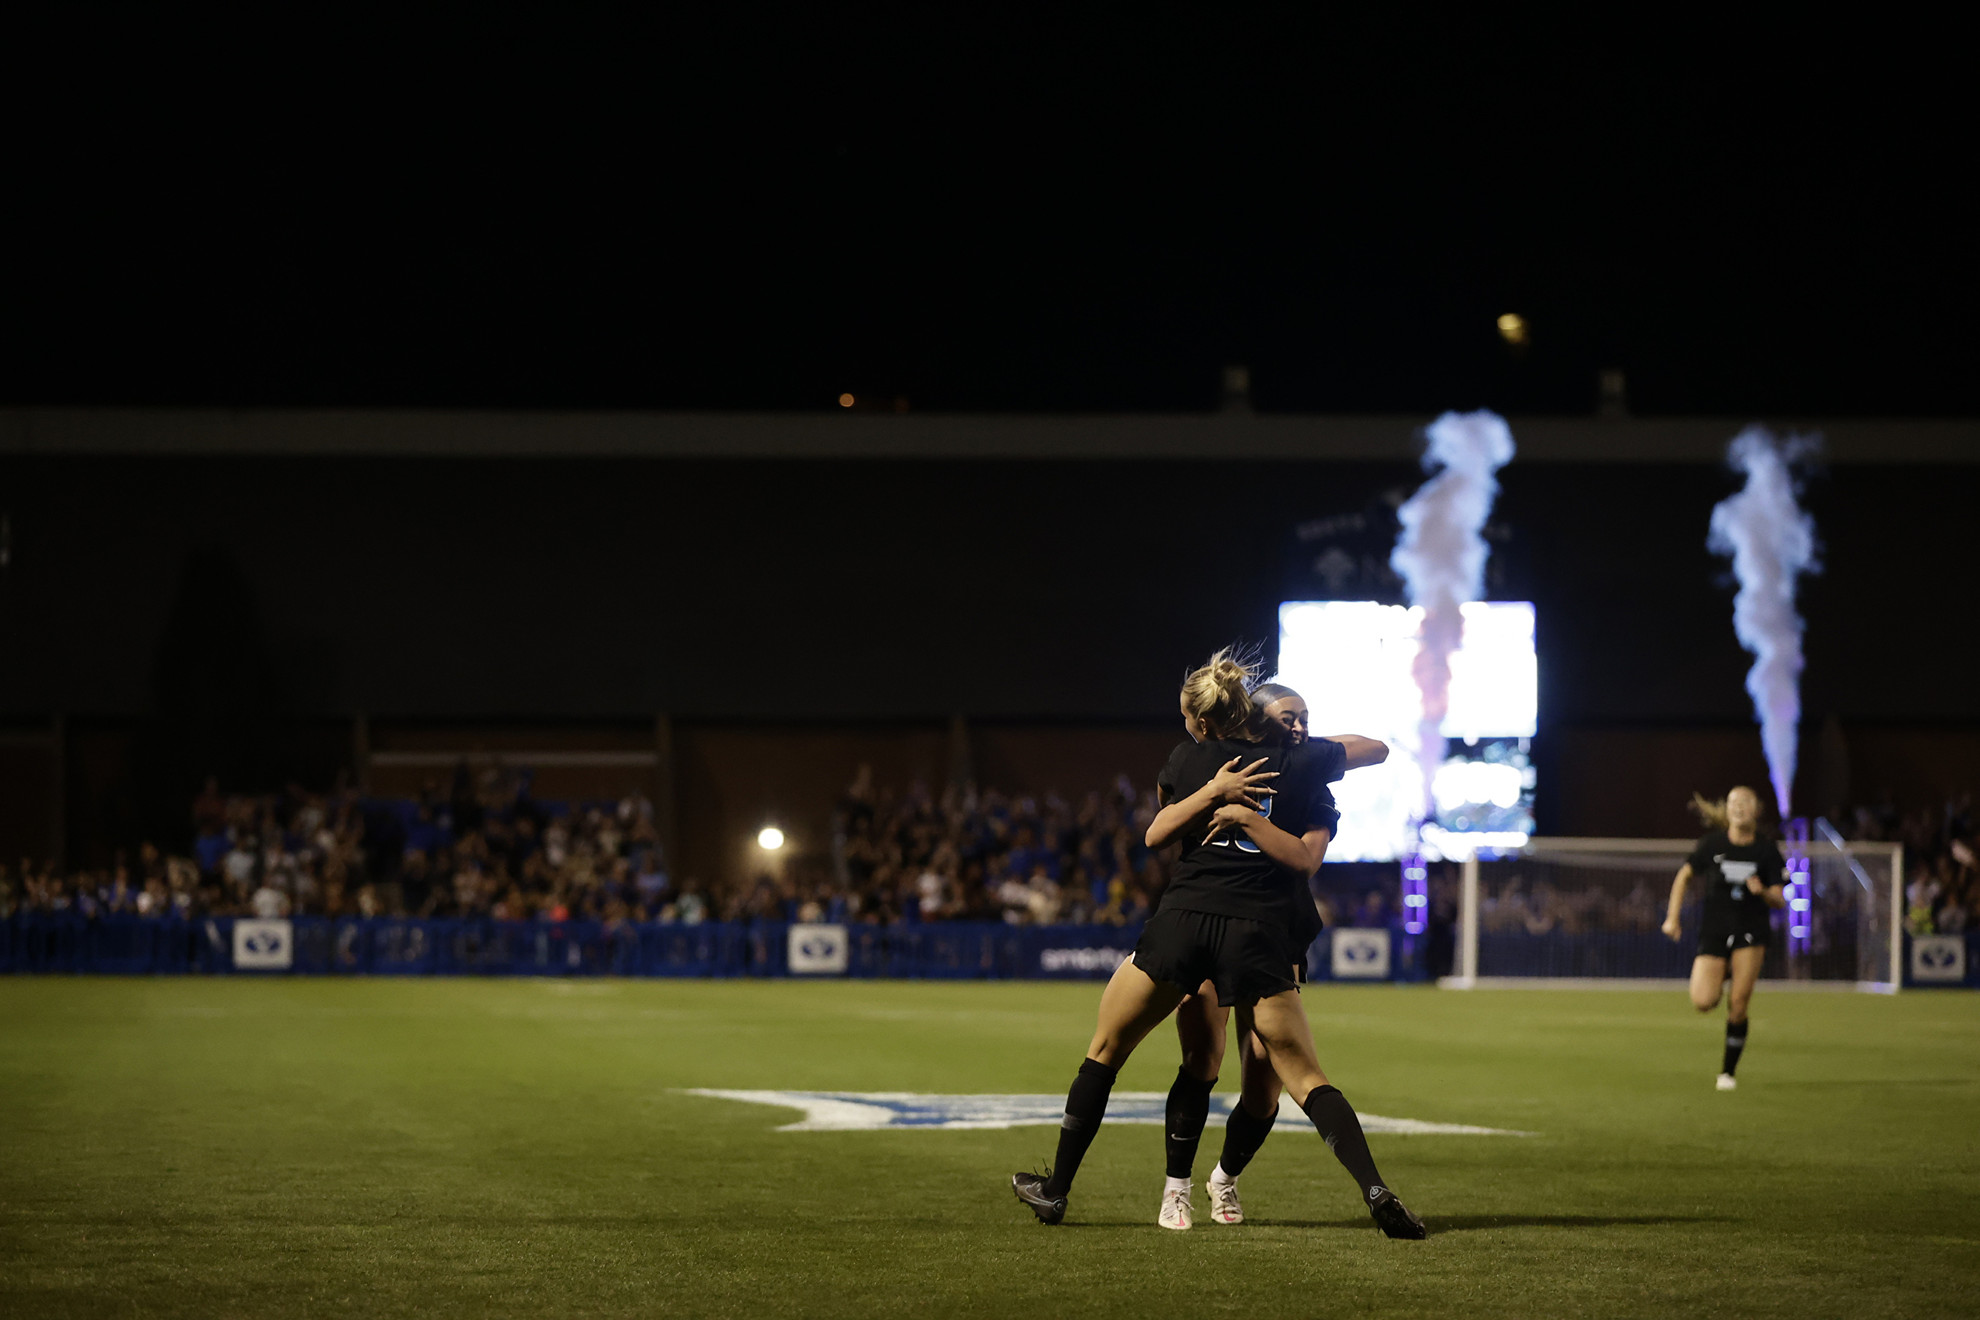 Soccer: TCU earns thrilling 3-3 draw at No. 1 BYU and home win